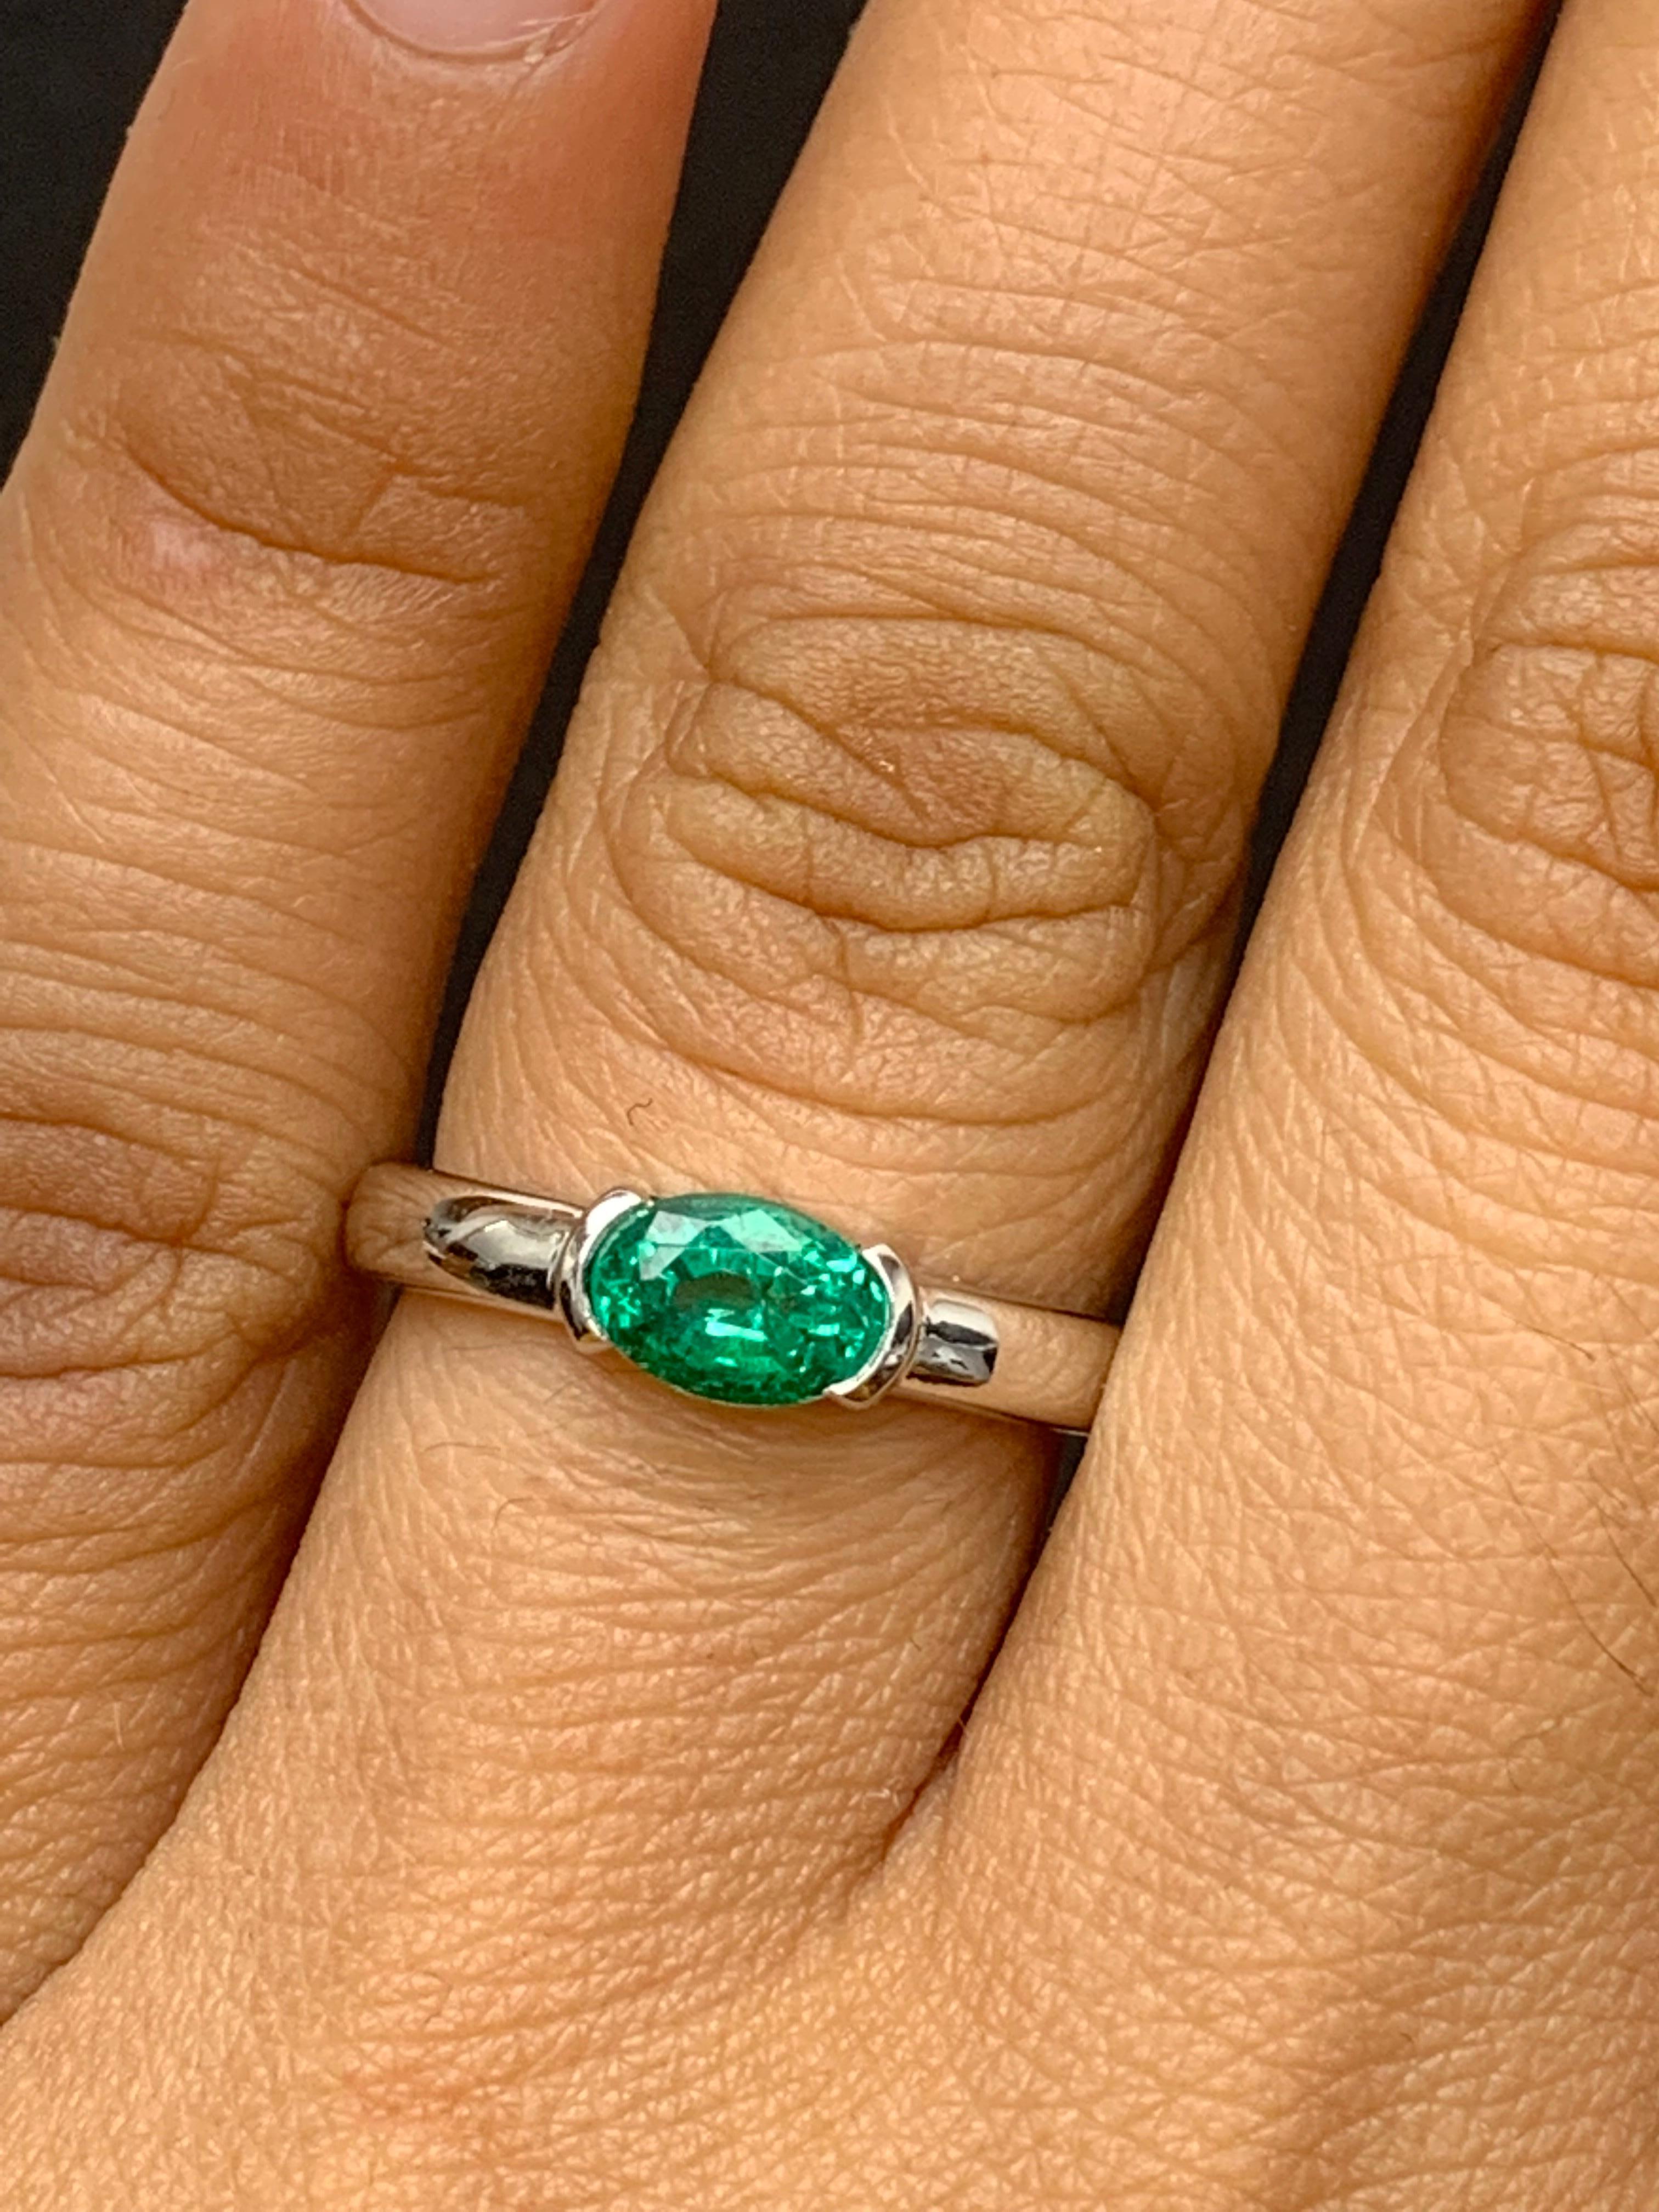 0.77 Carat Oval Cut Emerald Band Ring in 14K White Gold For Sale 4